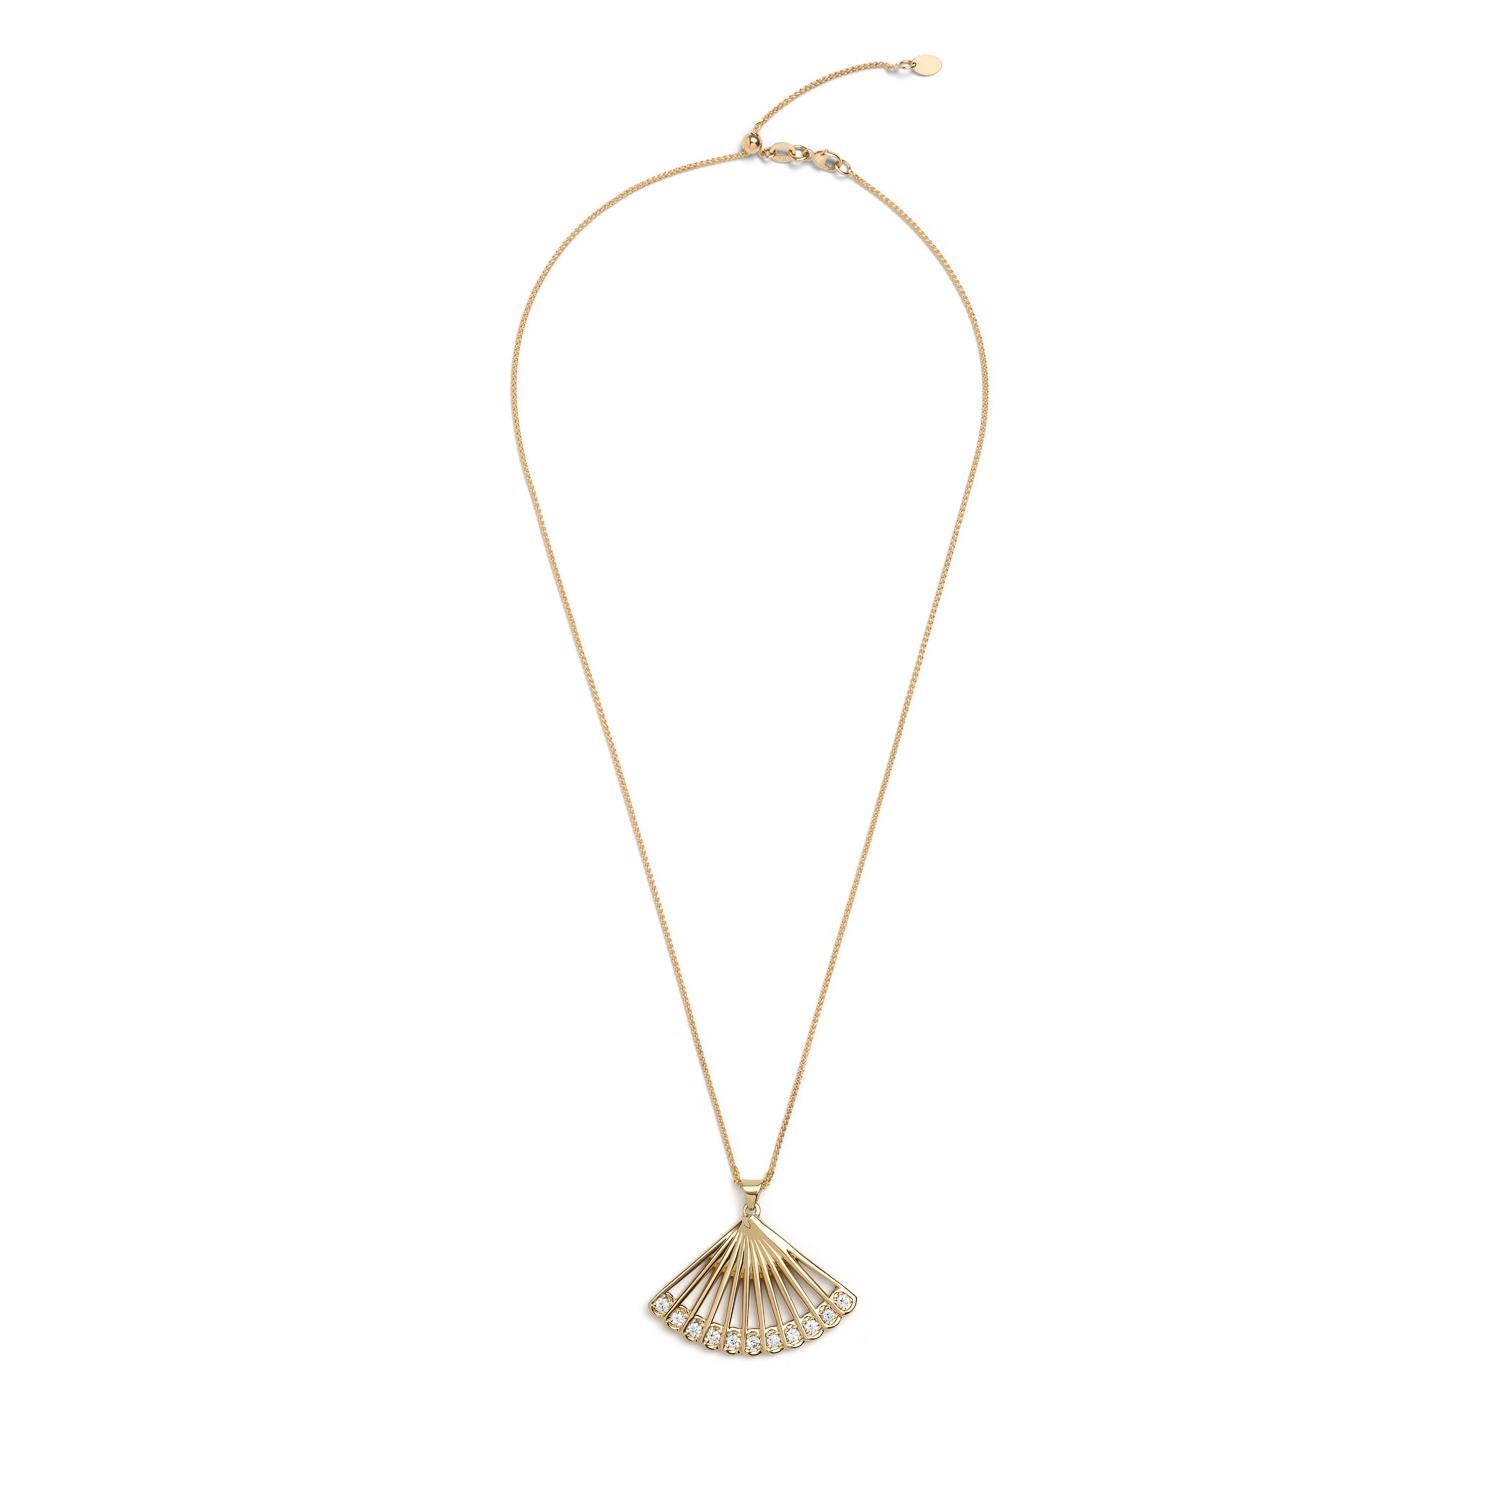 Our Zoe Fan Necklace is a modern update on a motif that will take you back to another era. This 14k yellow gold necklace layers beautifully with other necklaces, but is bold enough to be worn on its own. 

White diamond carat weight: 0.35 carats
On